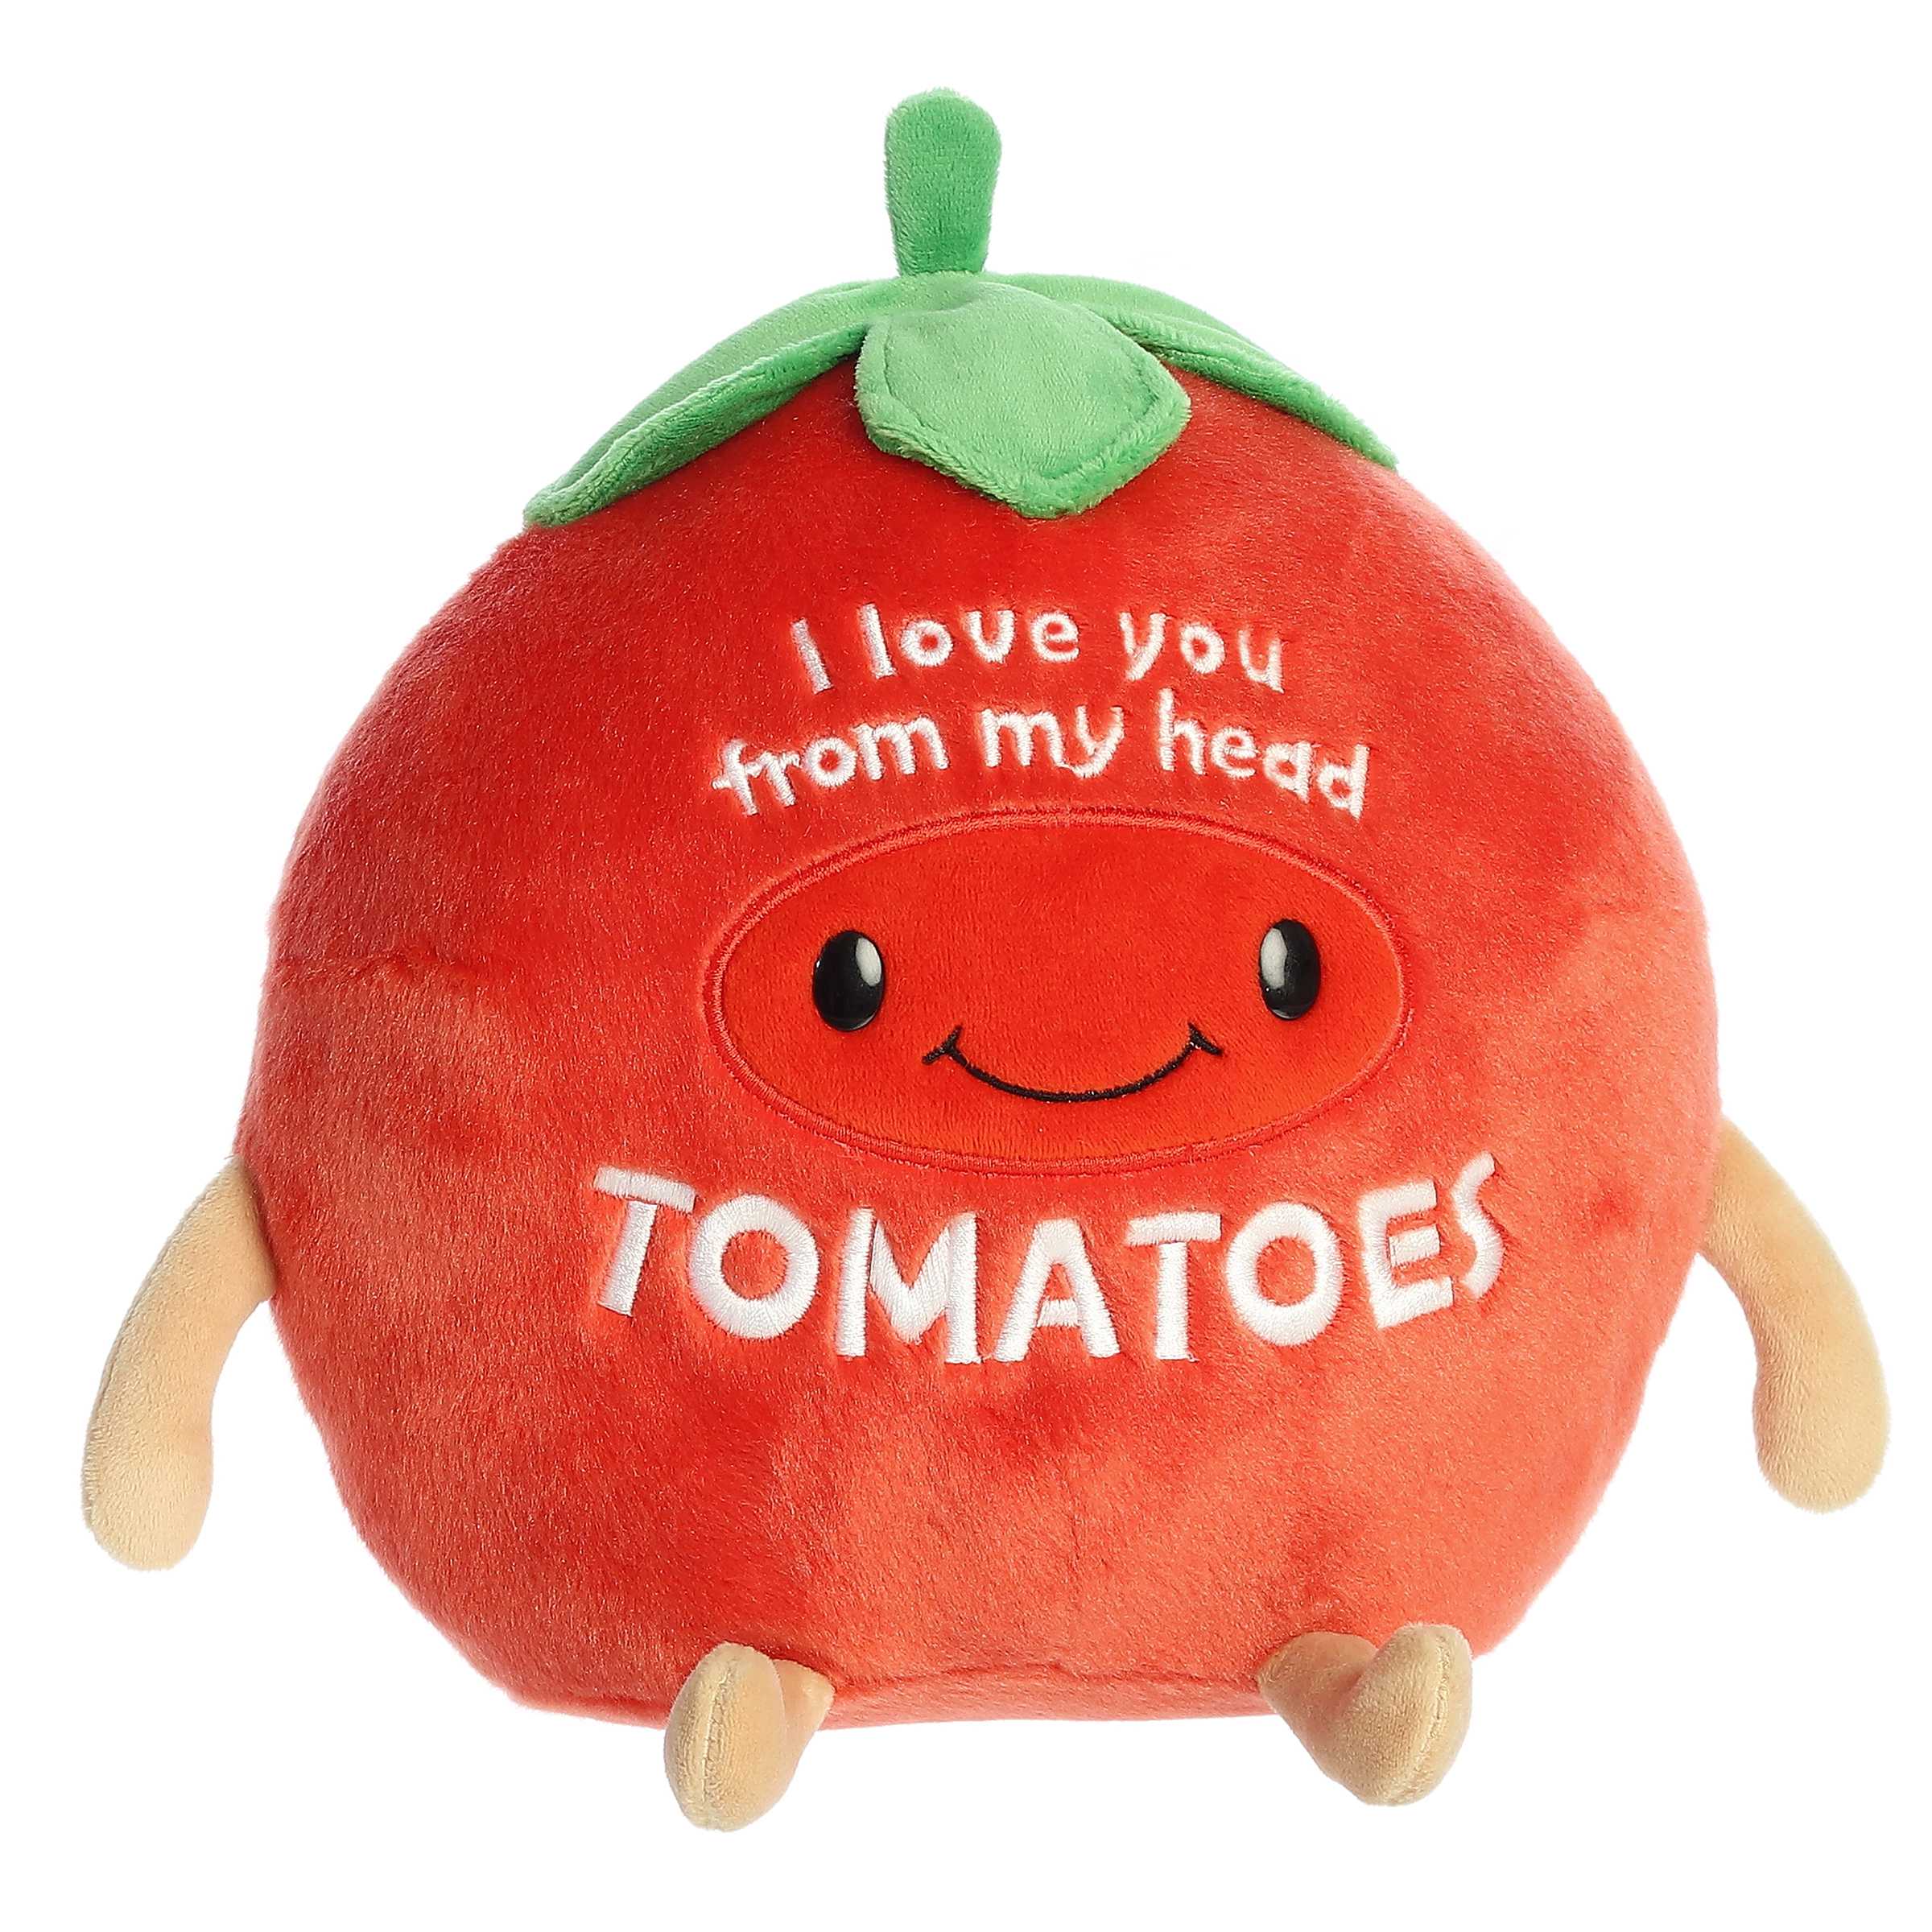 Aurora® - JUST SAYIN'™ - 8.5" Love You From Head To Tomatoes™